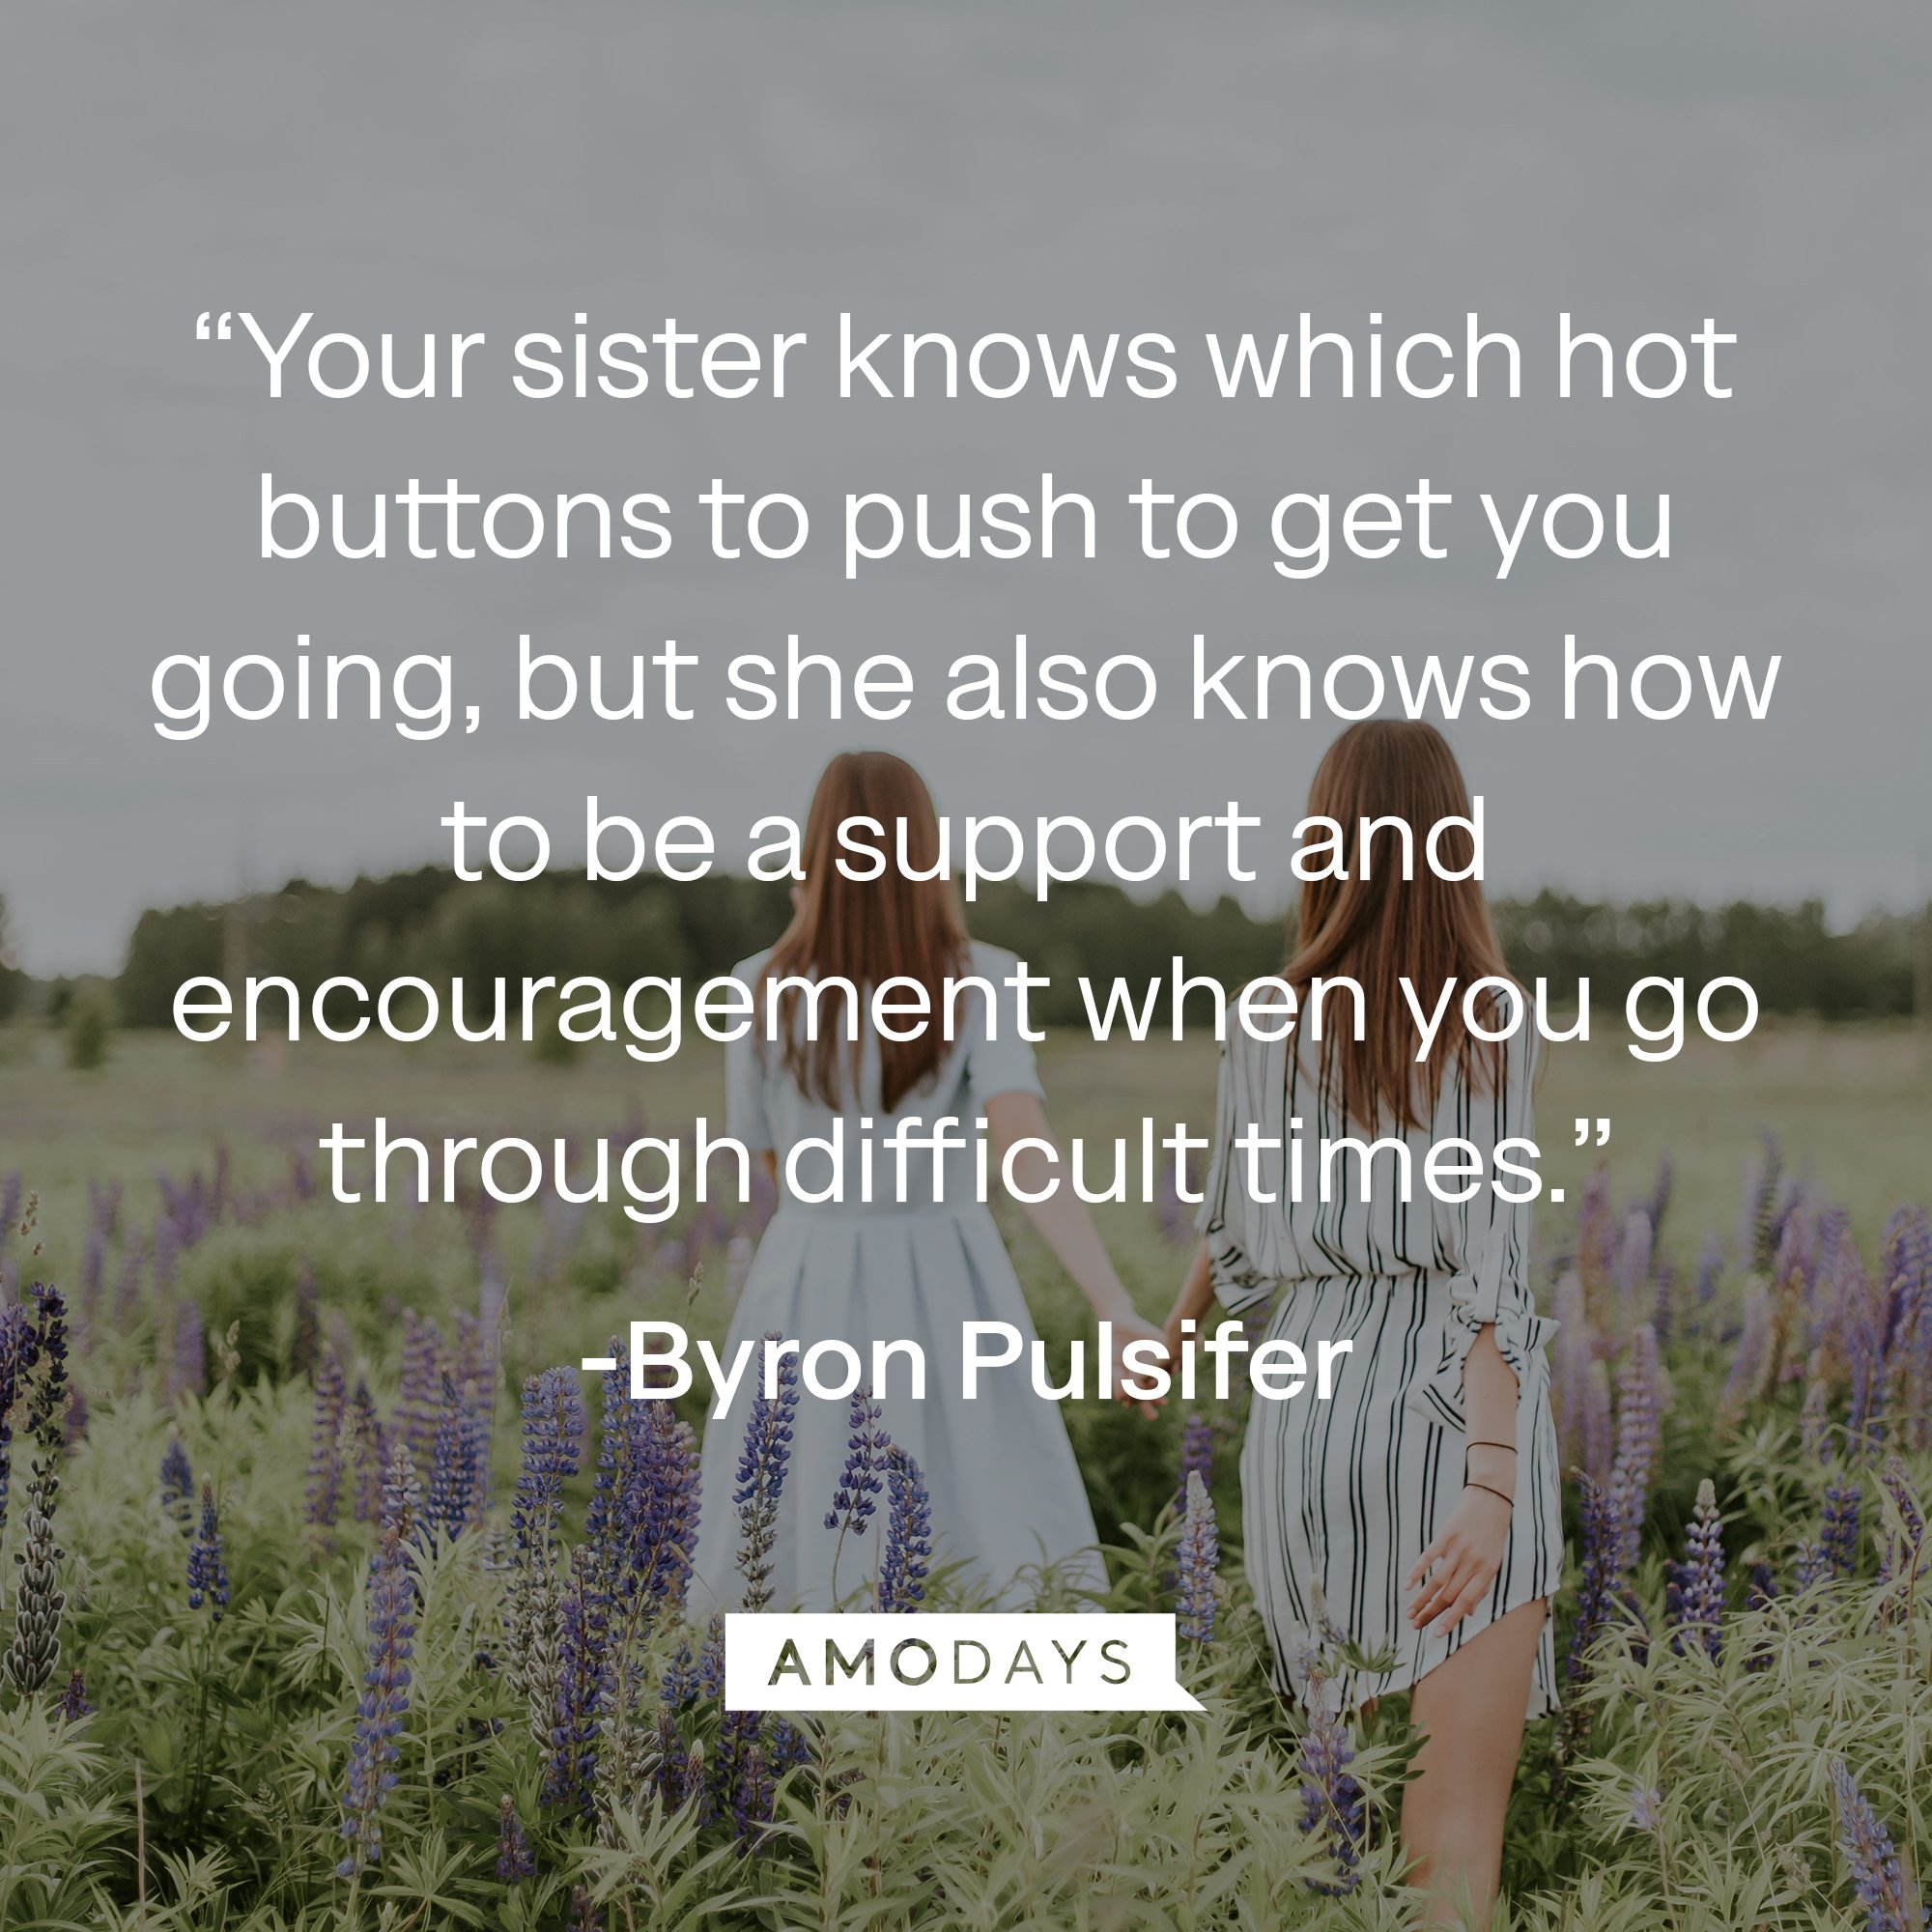  Byron Pulsifer's quote: “Your sister knows which hot buttons to push to get you going, but she also knows how to be a support and encouragement when you go through difficult times.” | Image: AmoDays